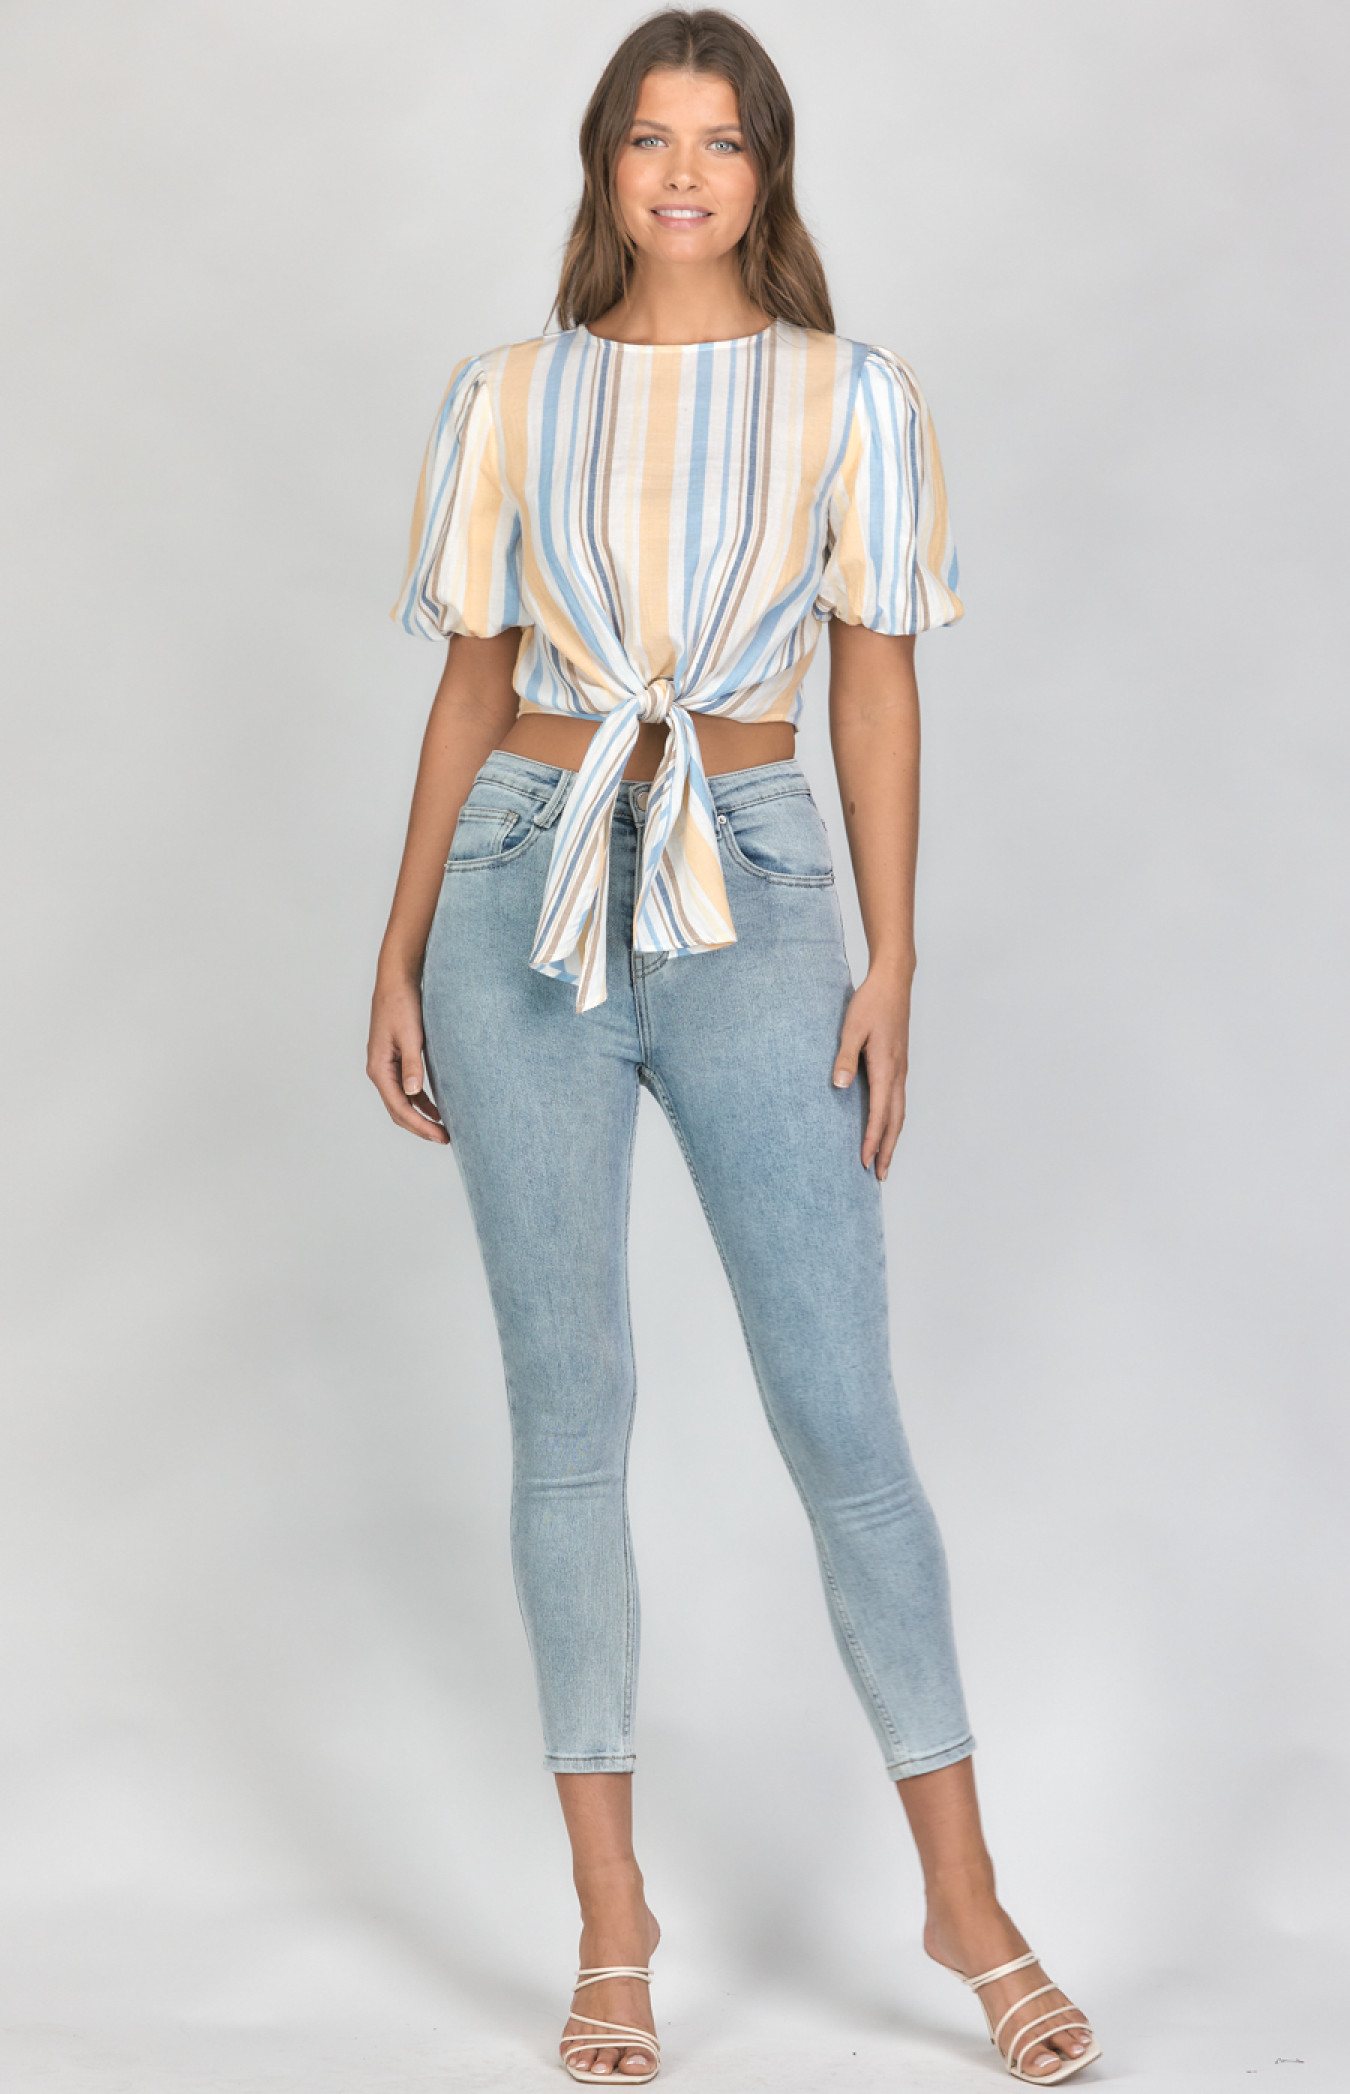 Striped Tie Front Top with Puff Sleeves (STO594B)